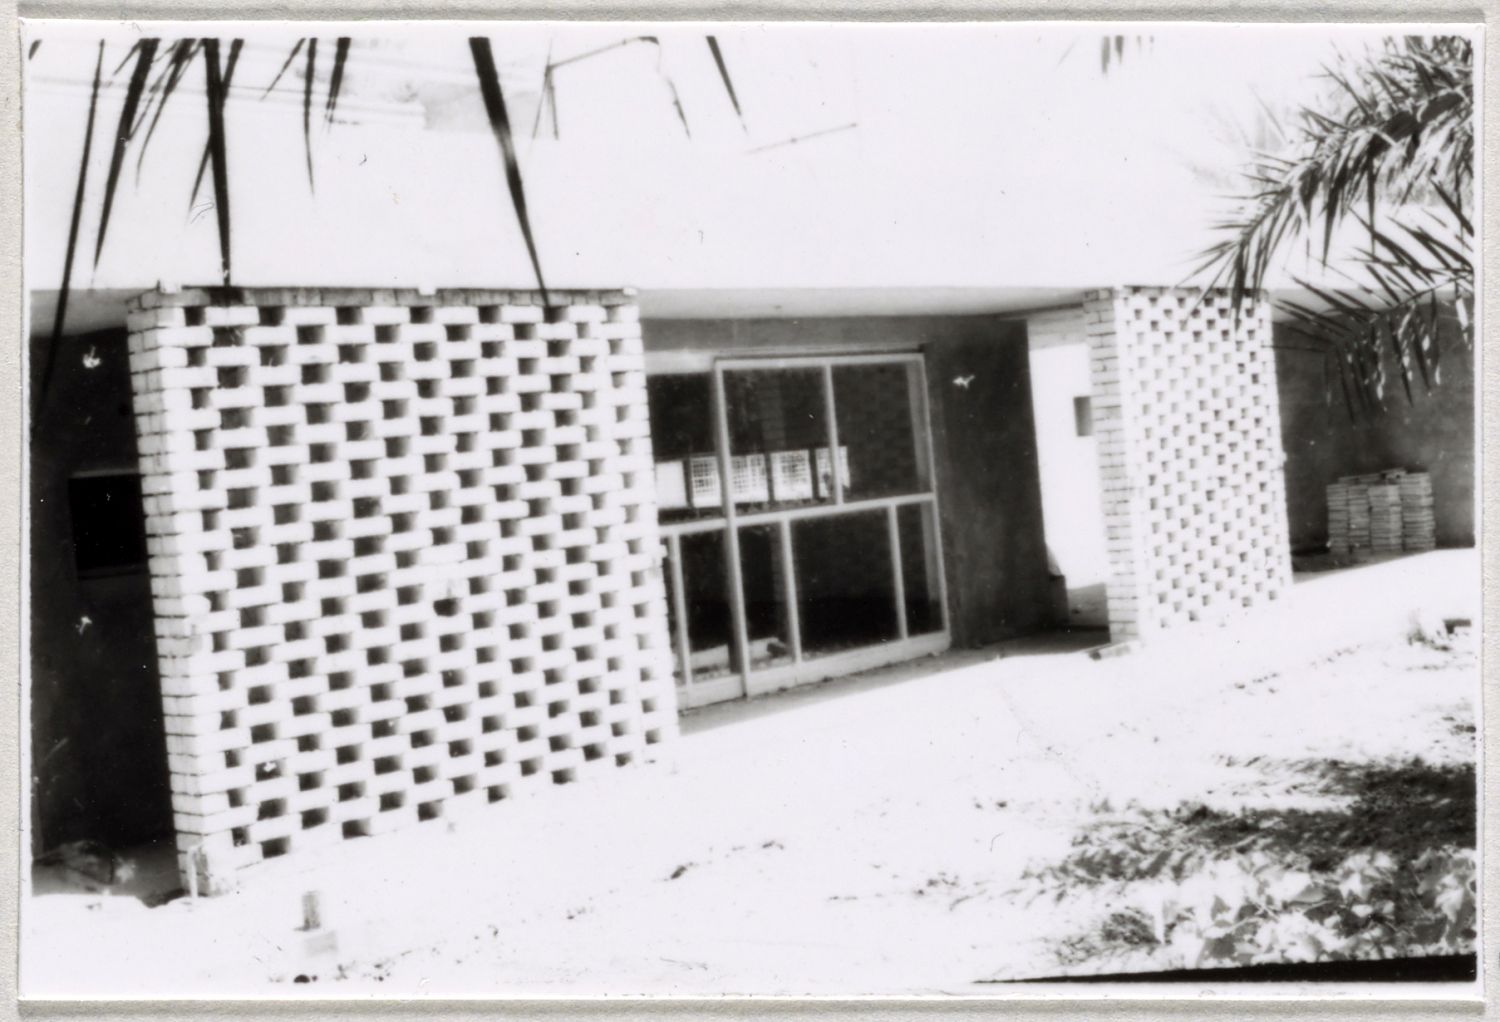 Exterior view of house during construction, showing porch.